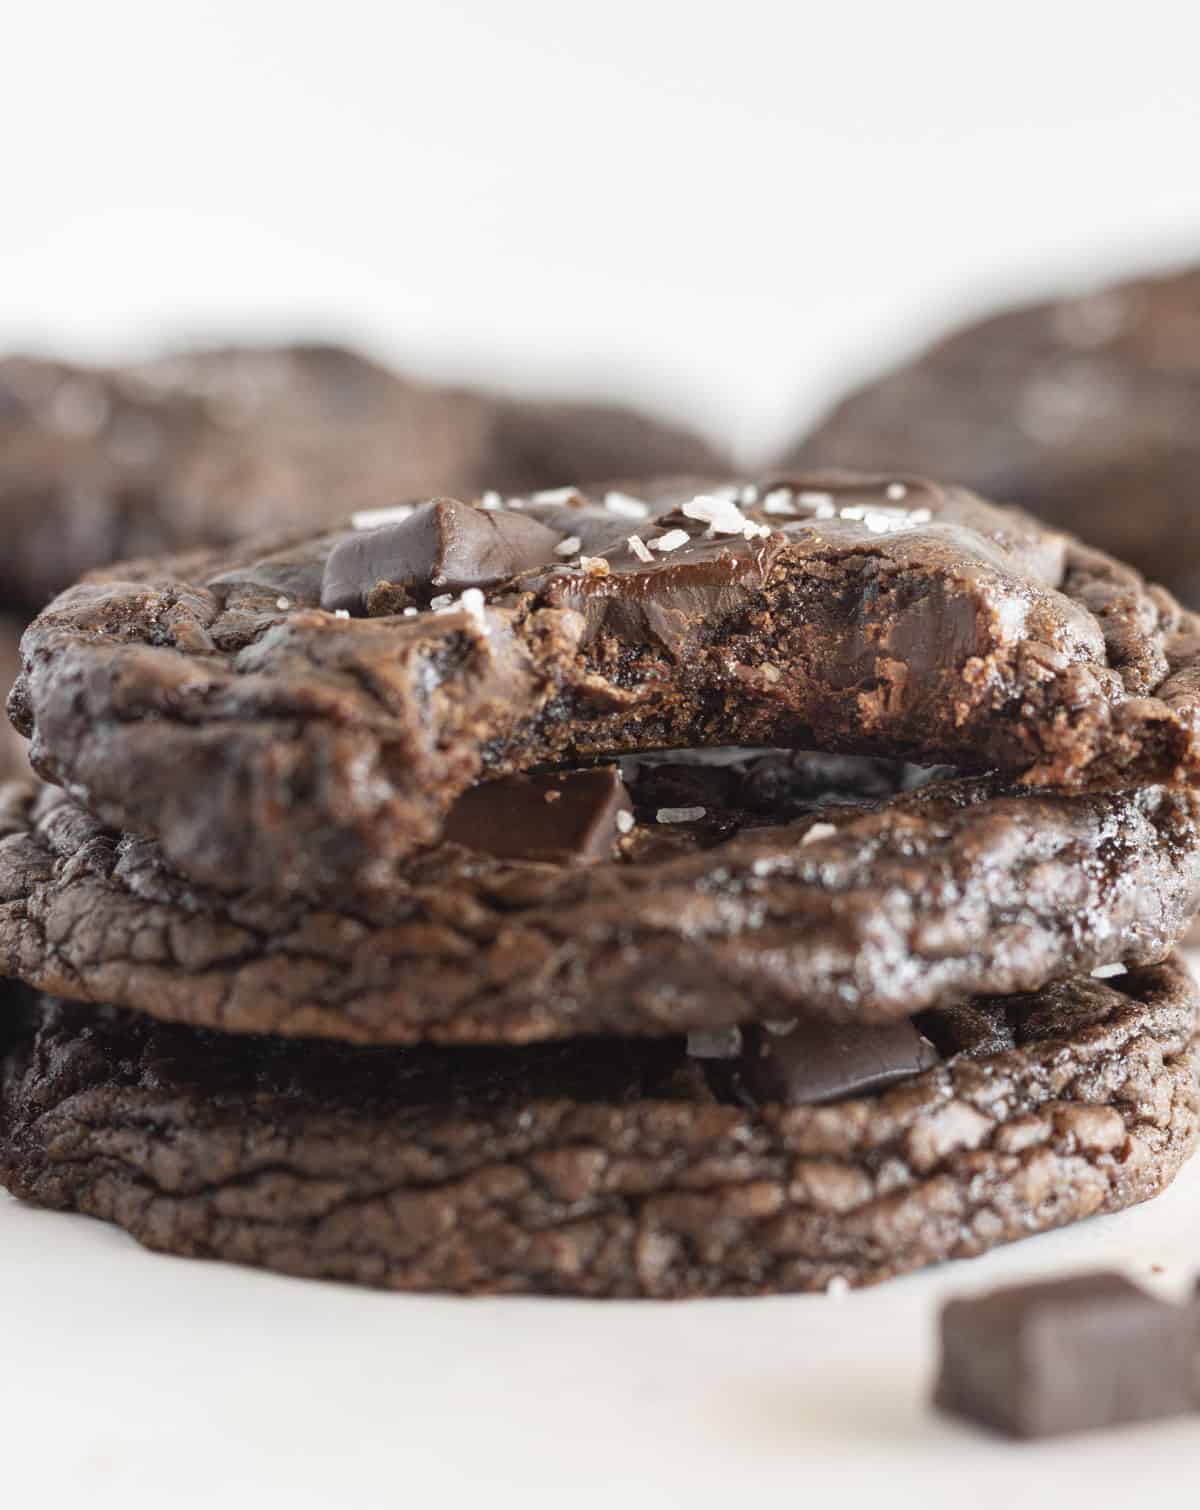 Three Dark Chocolate Cookies stacked on top of each other with a bite taken out of the one on top.